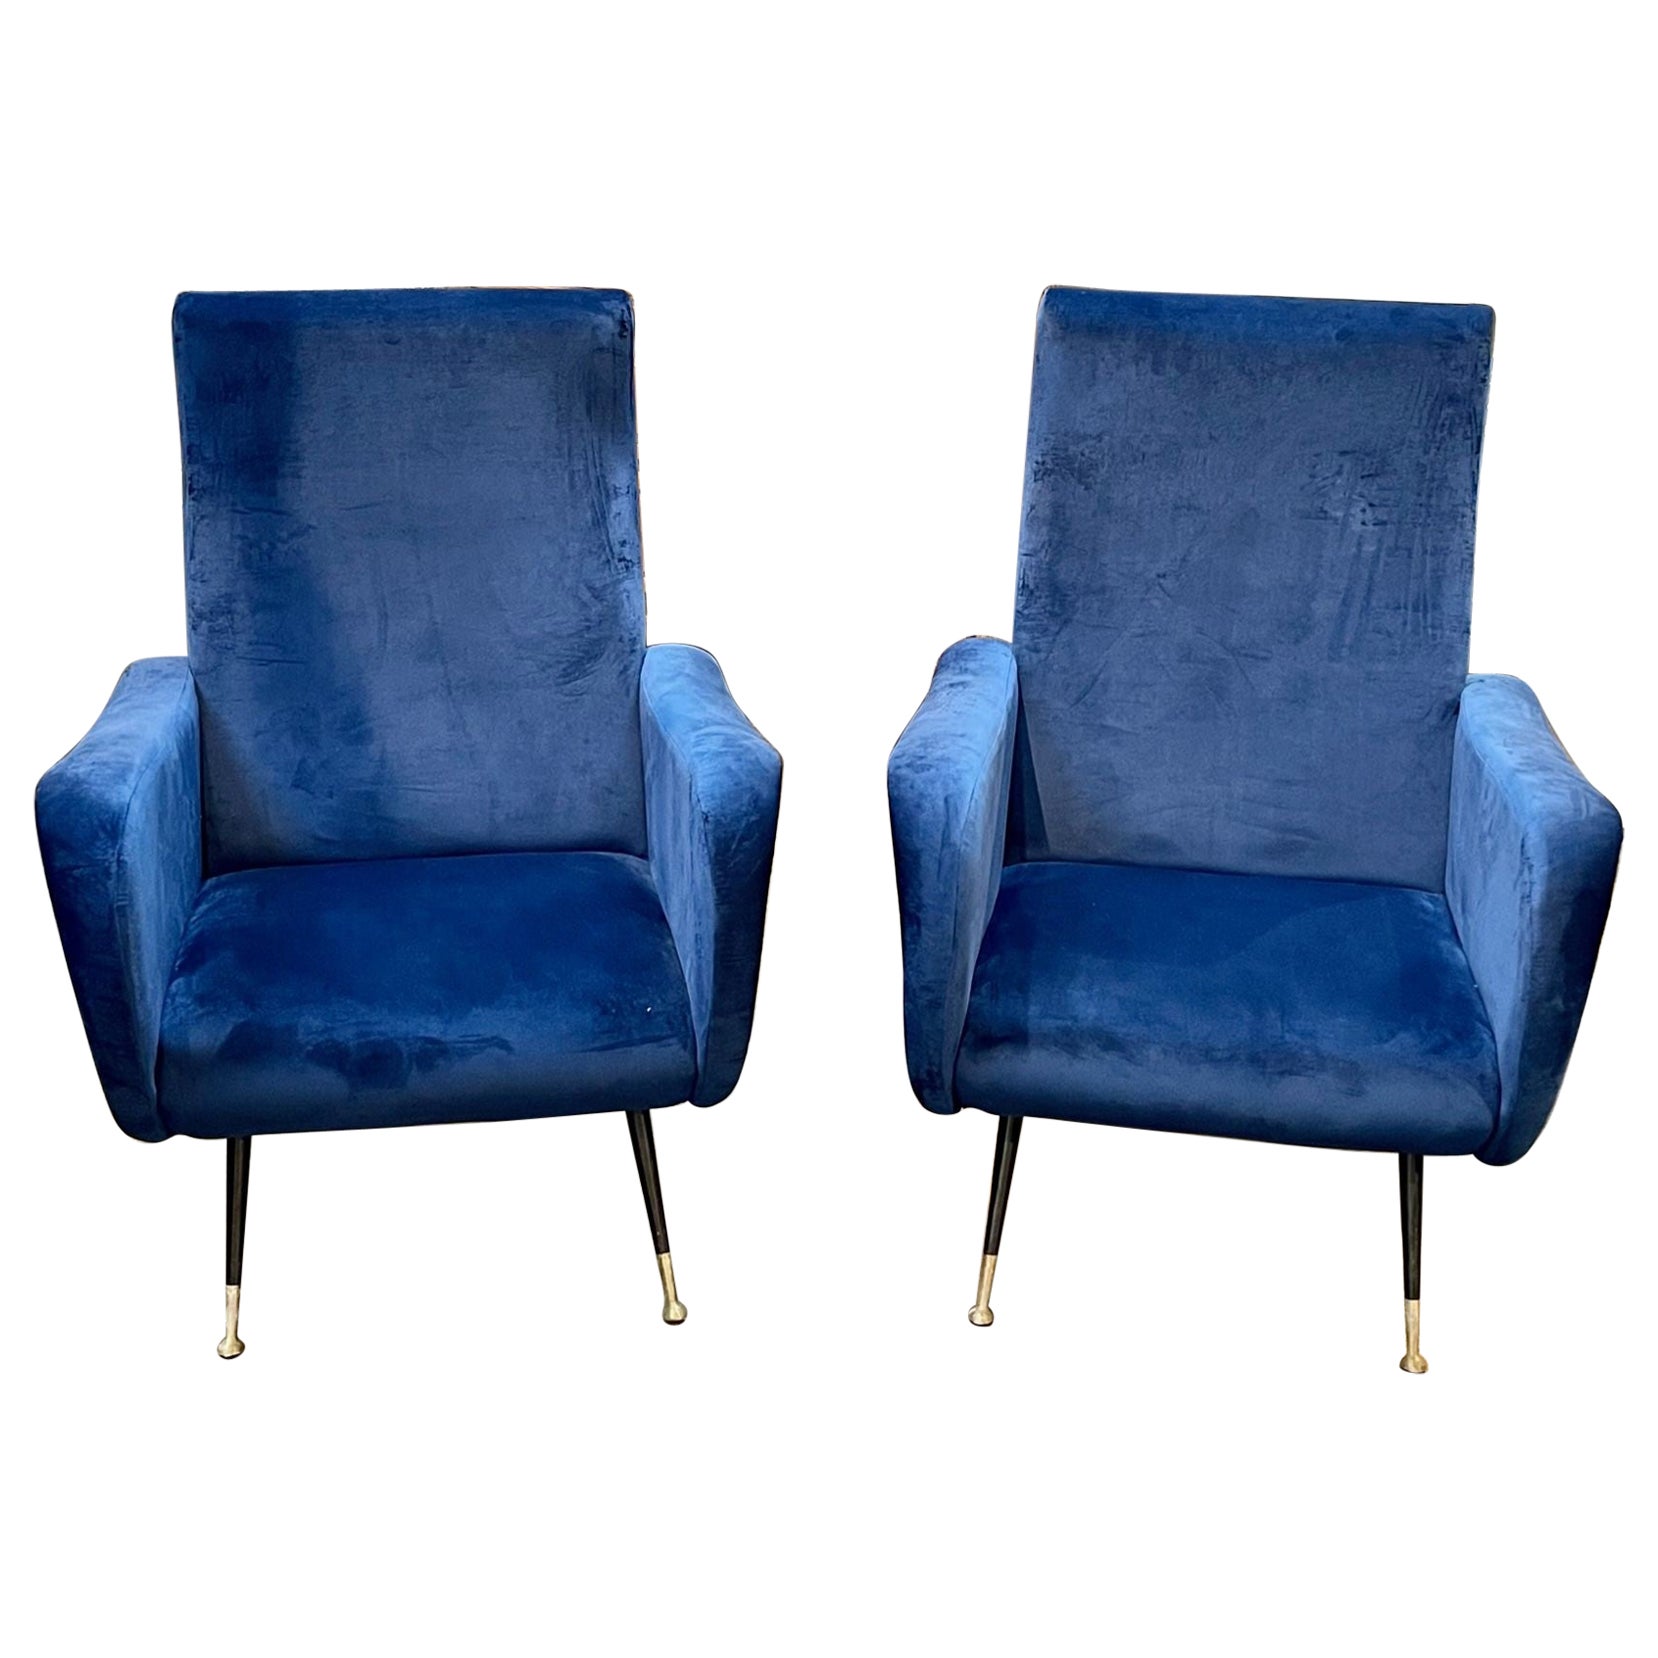 Pair of Italian Mid-Century Navy Gio Ponti Style Chairs For Sale